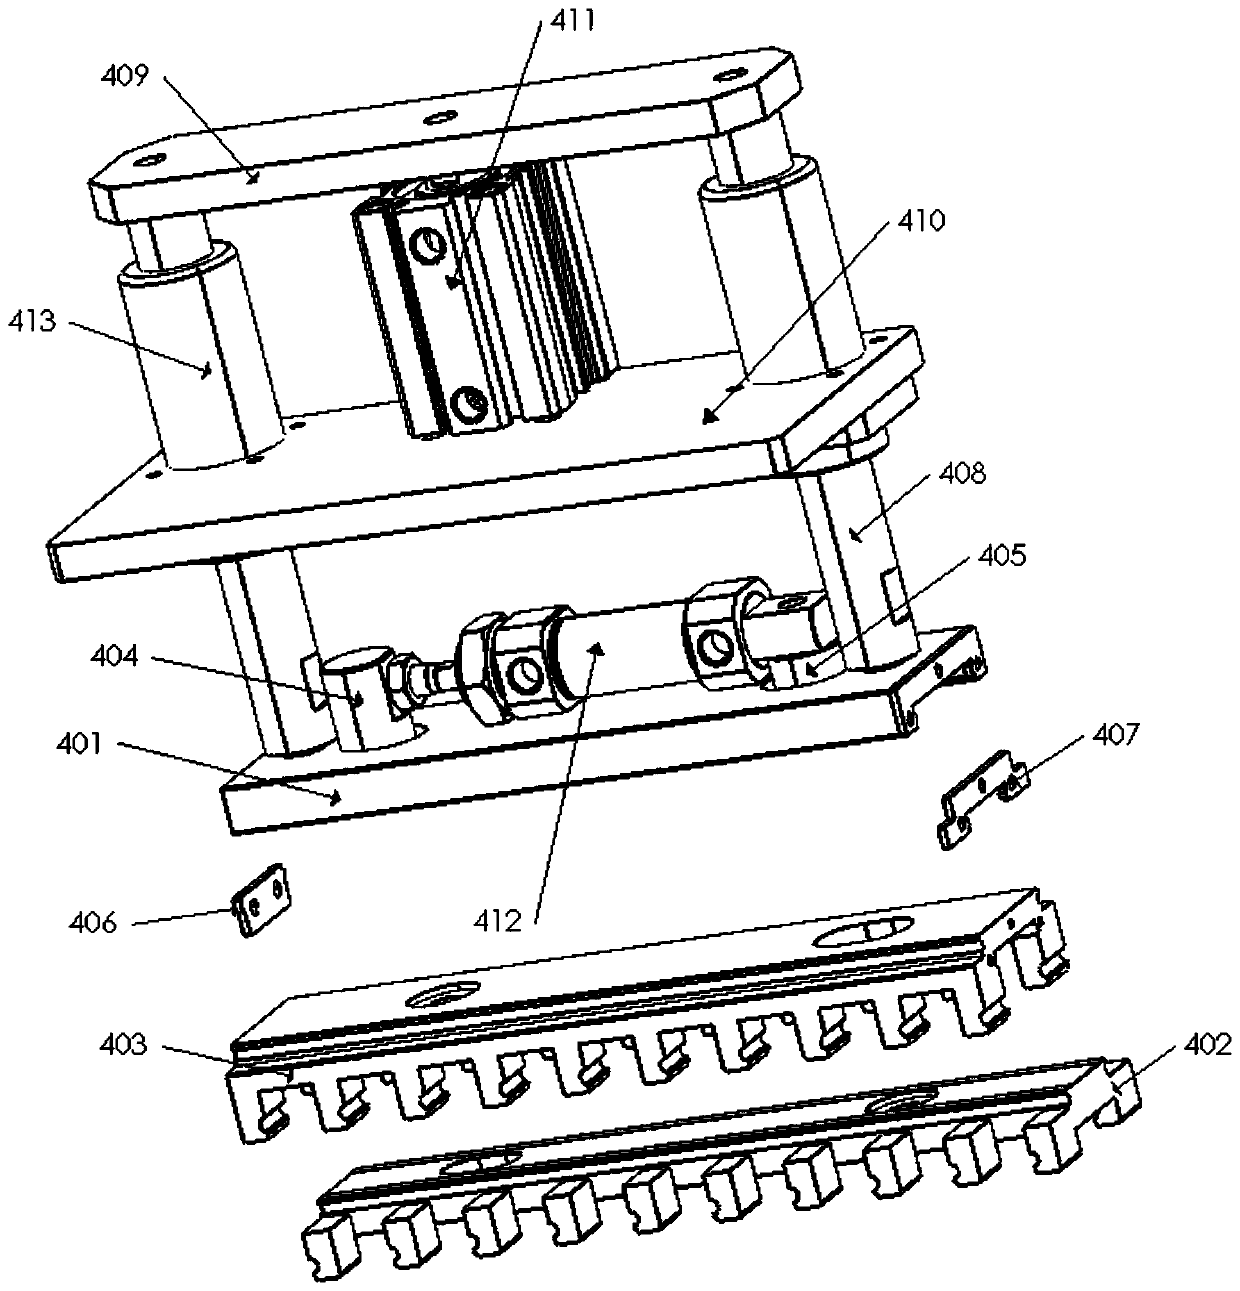 Rod inserting device for sponge rod production line processing